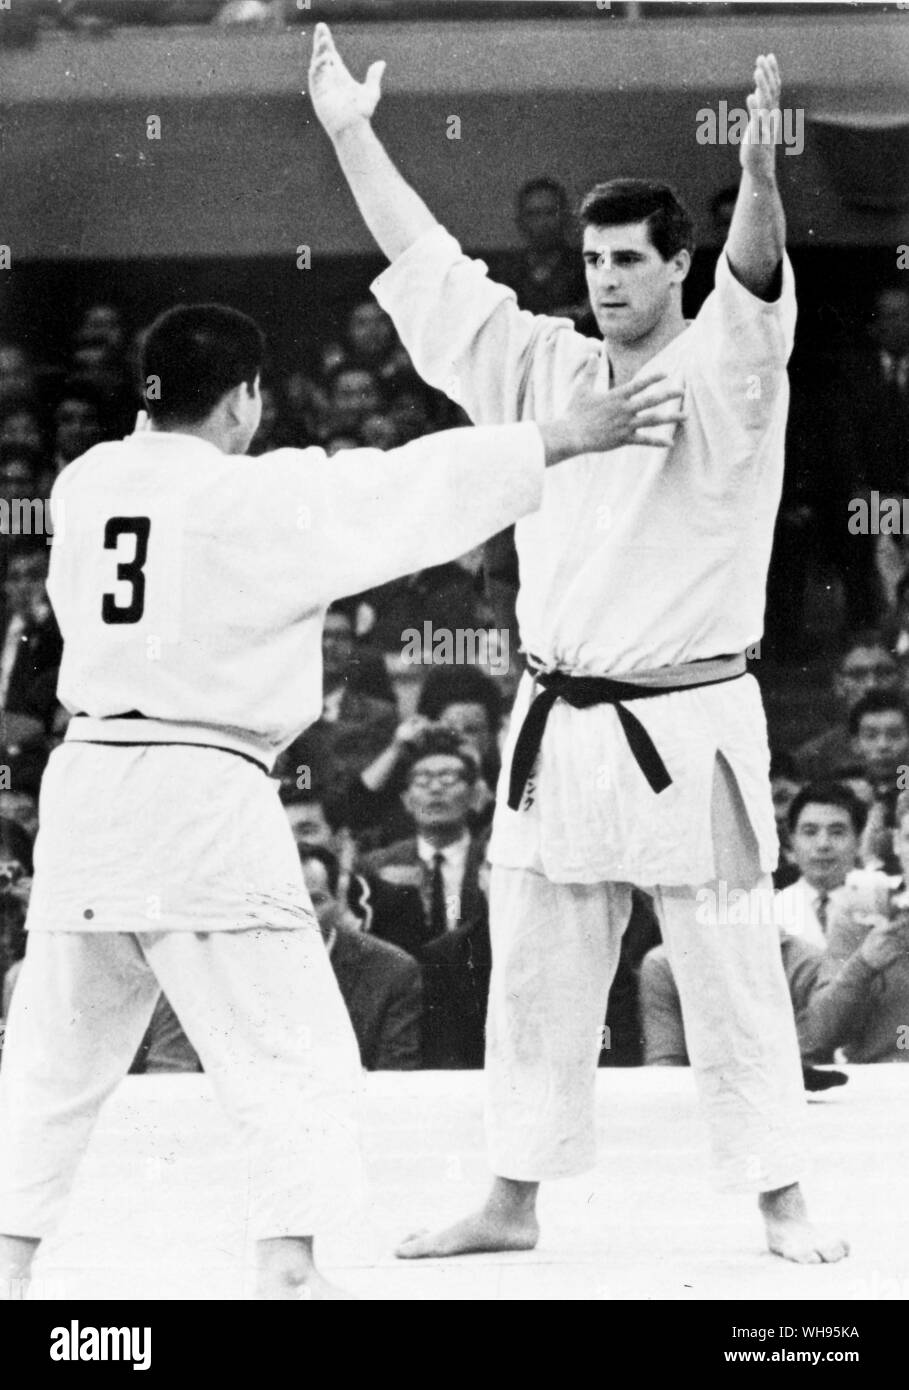 Japan, Tokyo Olympic Games, 1964: Judo the all weight division match between A Geesink and A Kaminaga Stock Photo